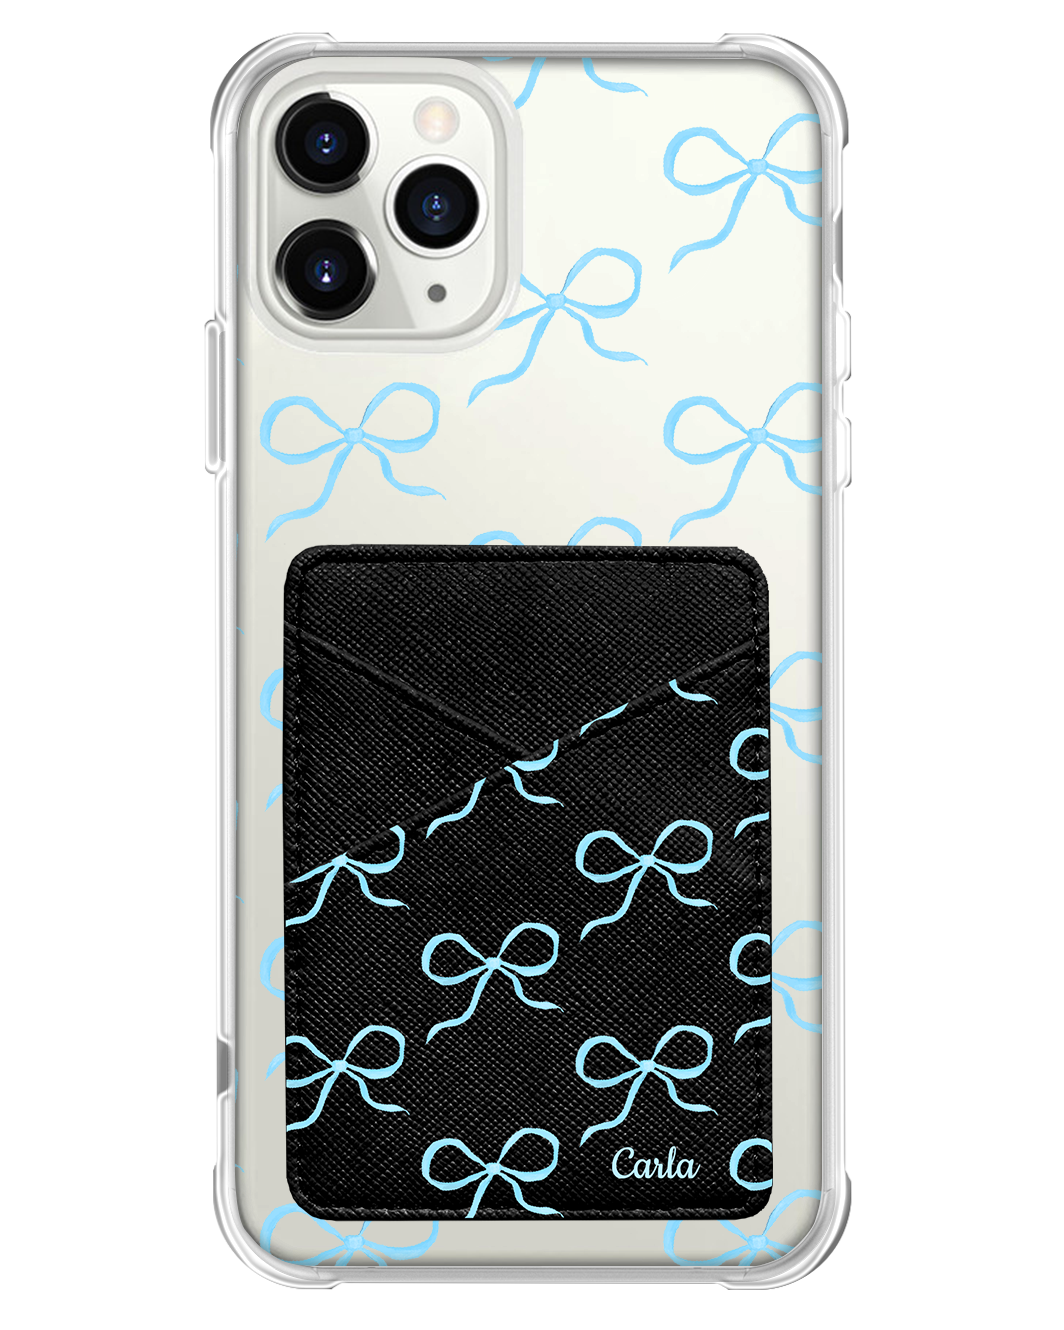 iPhone Phone Wallet Case - Coquette Blue Bow